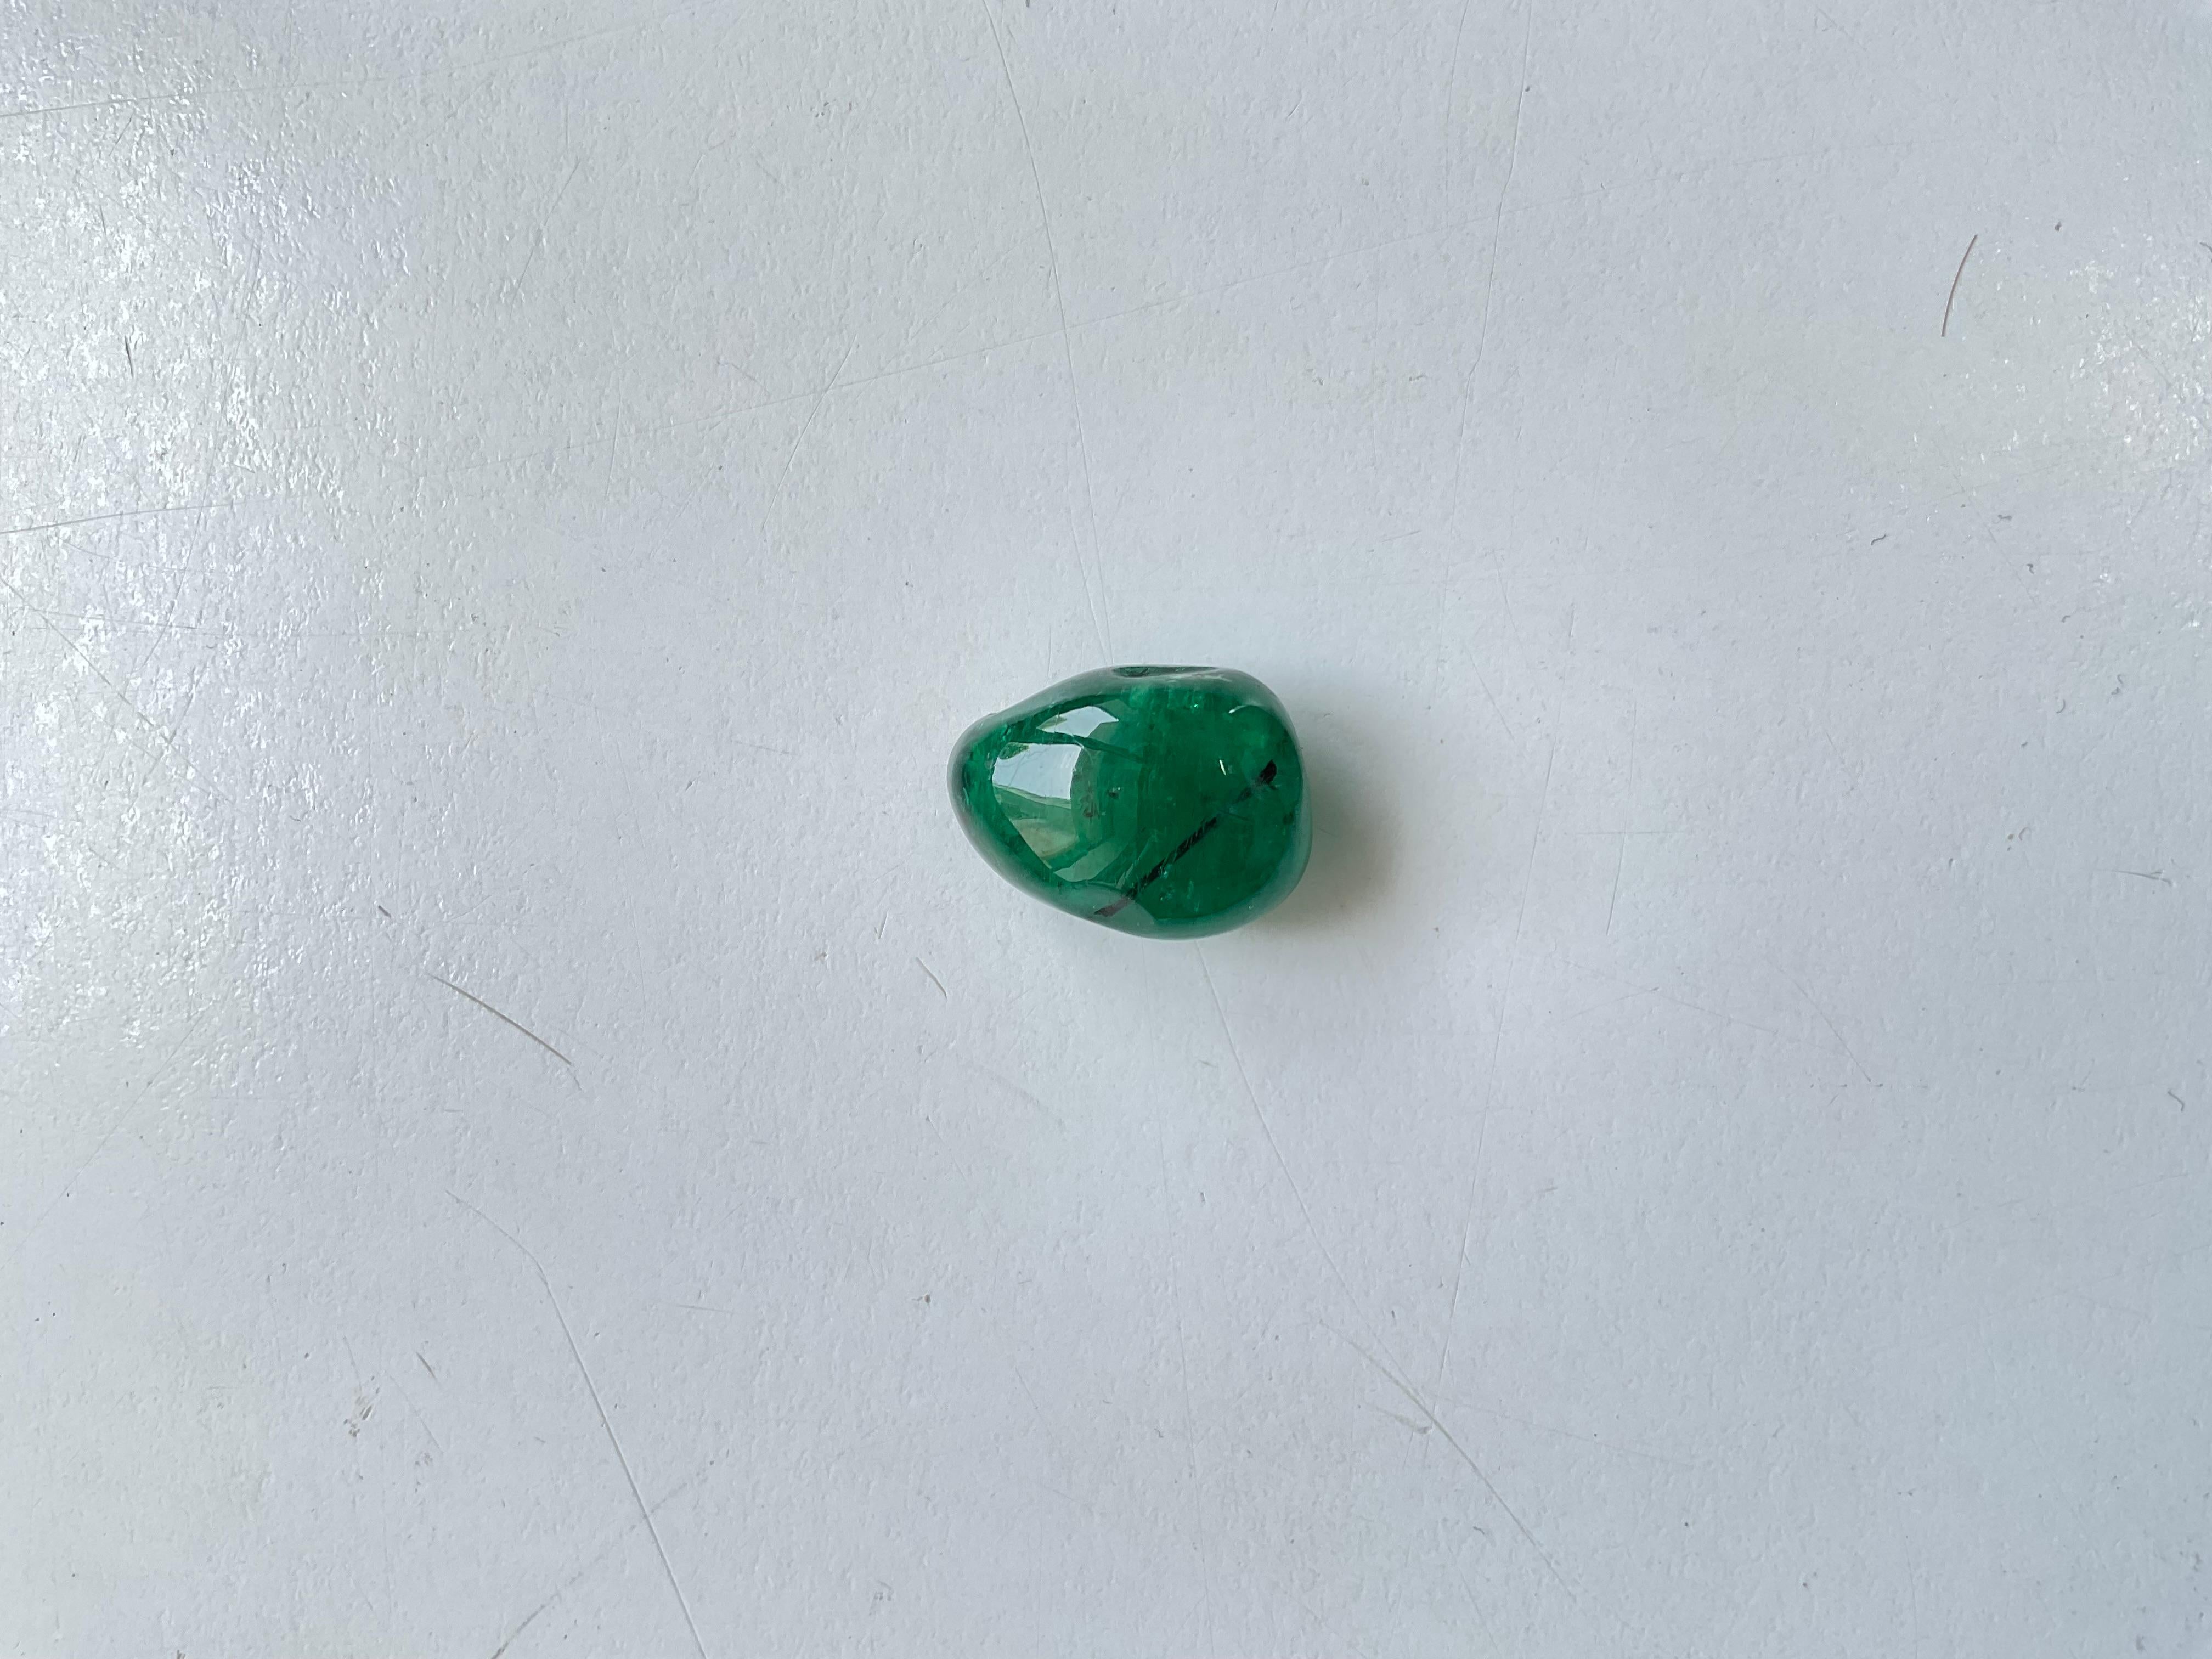 Weight: 22.40 Carats
Size: 20x15 MM
Pieces: 1
Shape: Smooth Tumble
